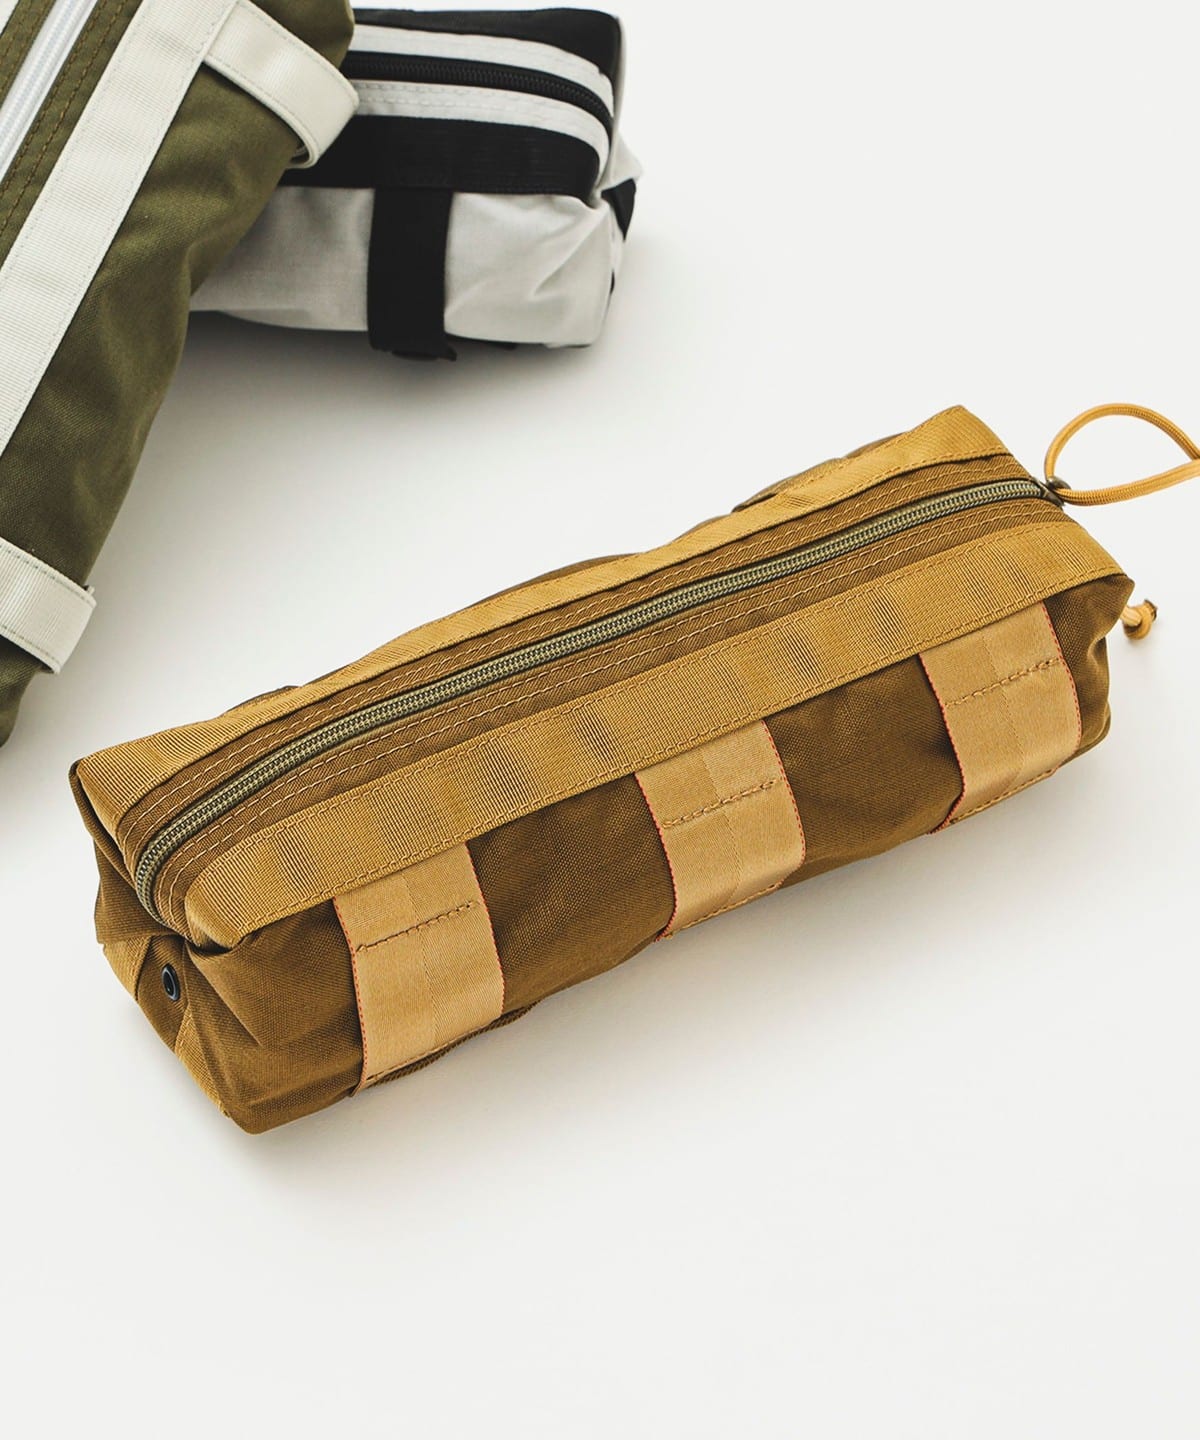 BEAMS PLUS（ビームス プラス）BRIEFING × BEAMS PLUS / 別注 DT Pouch